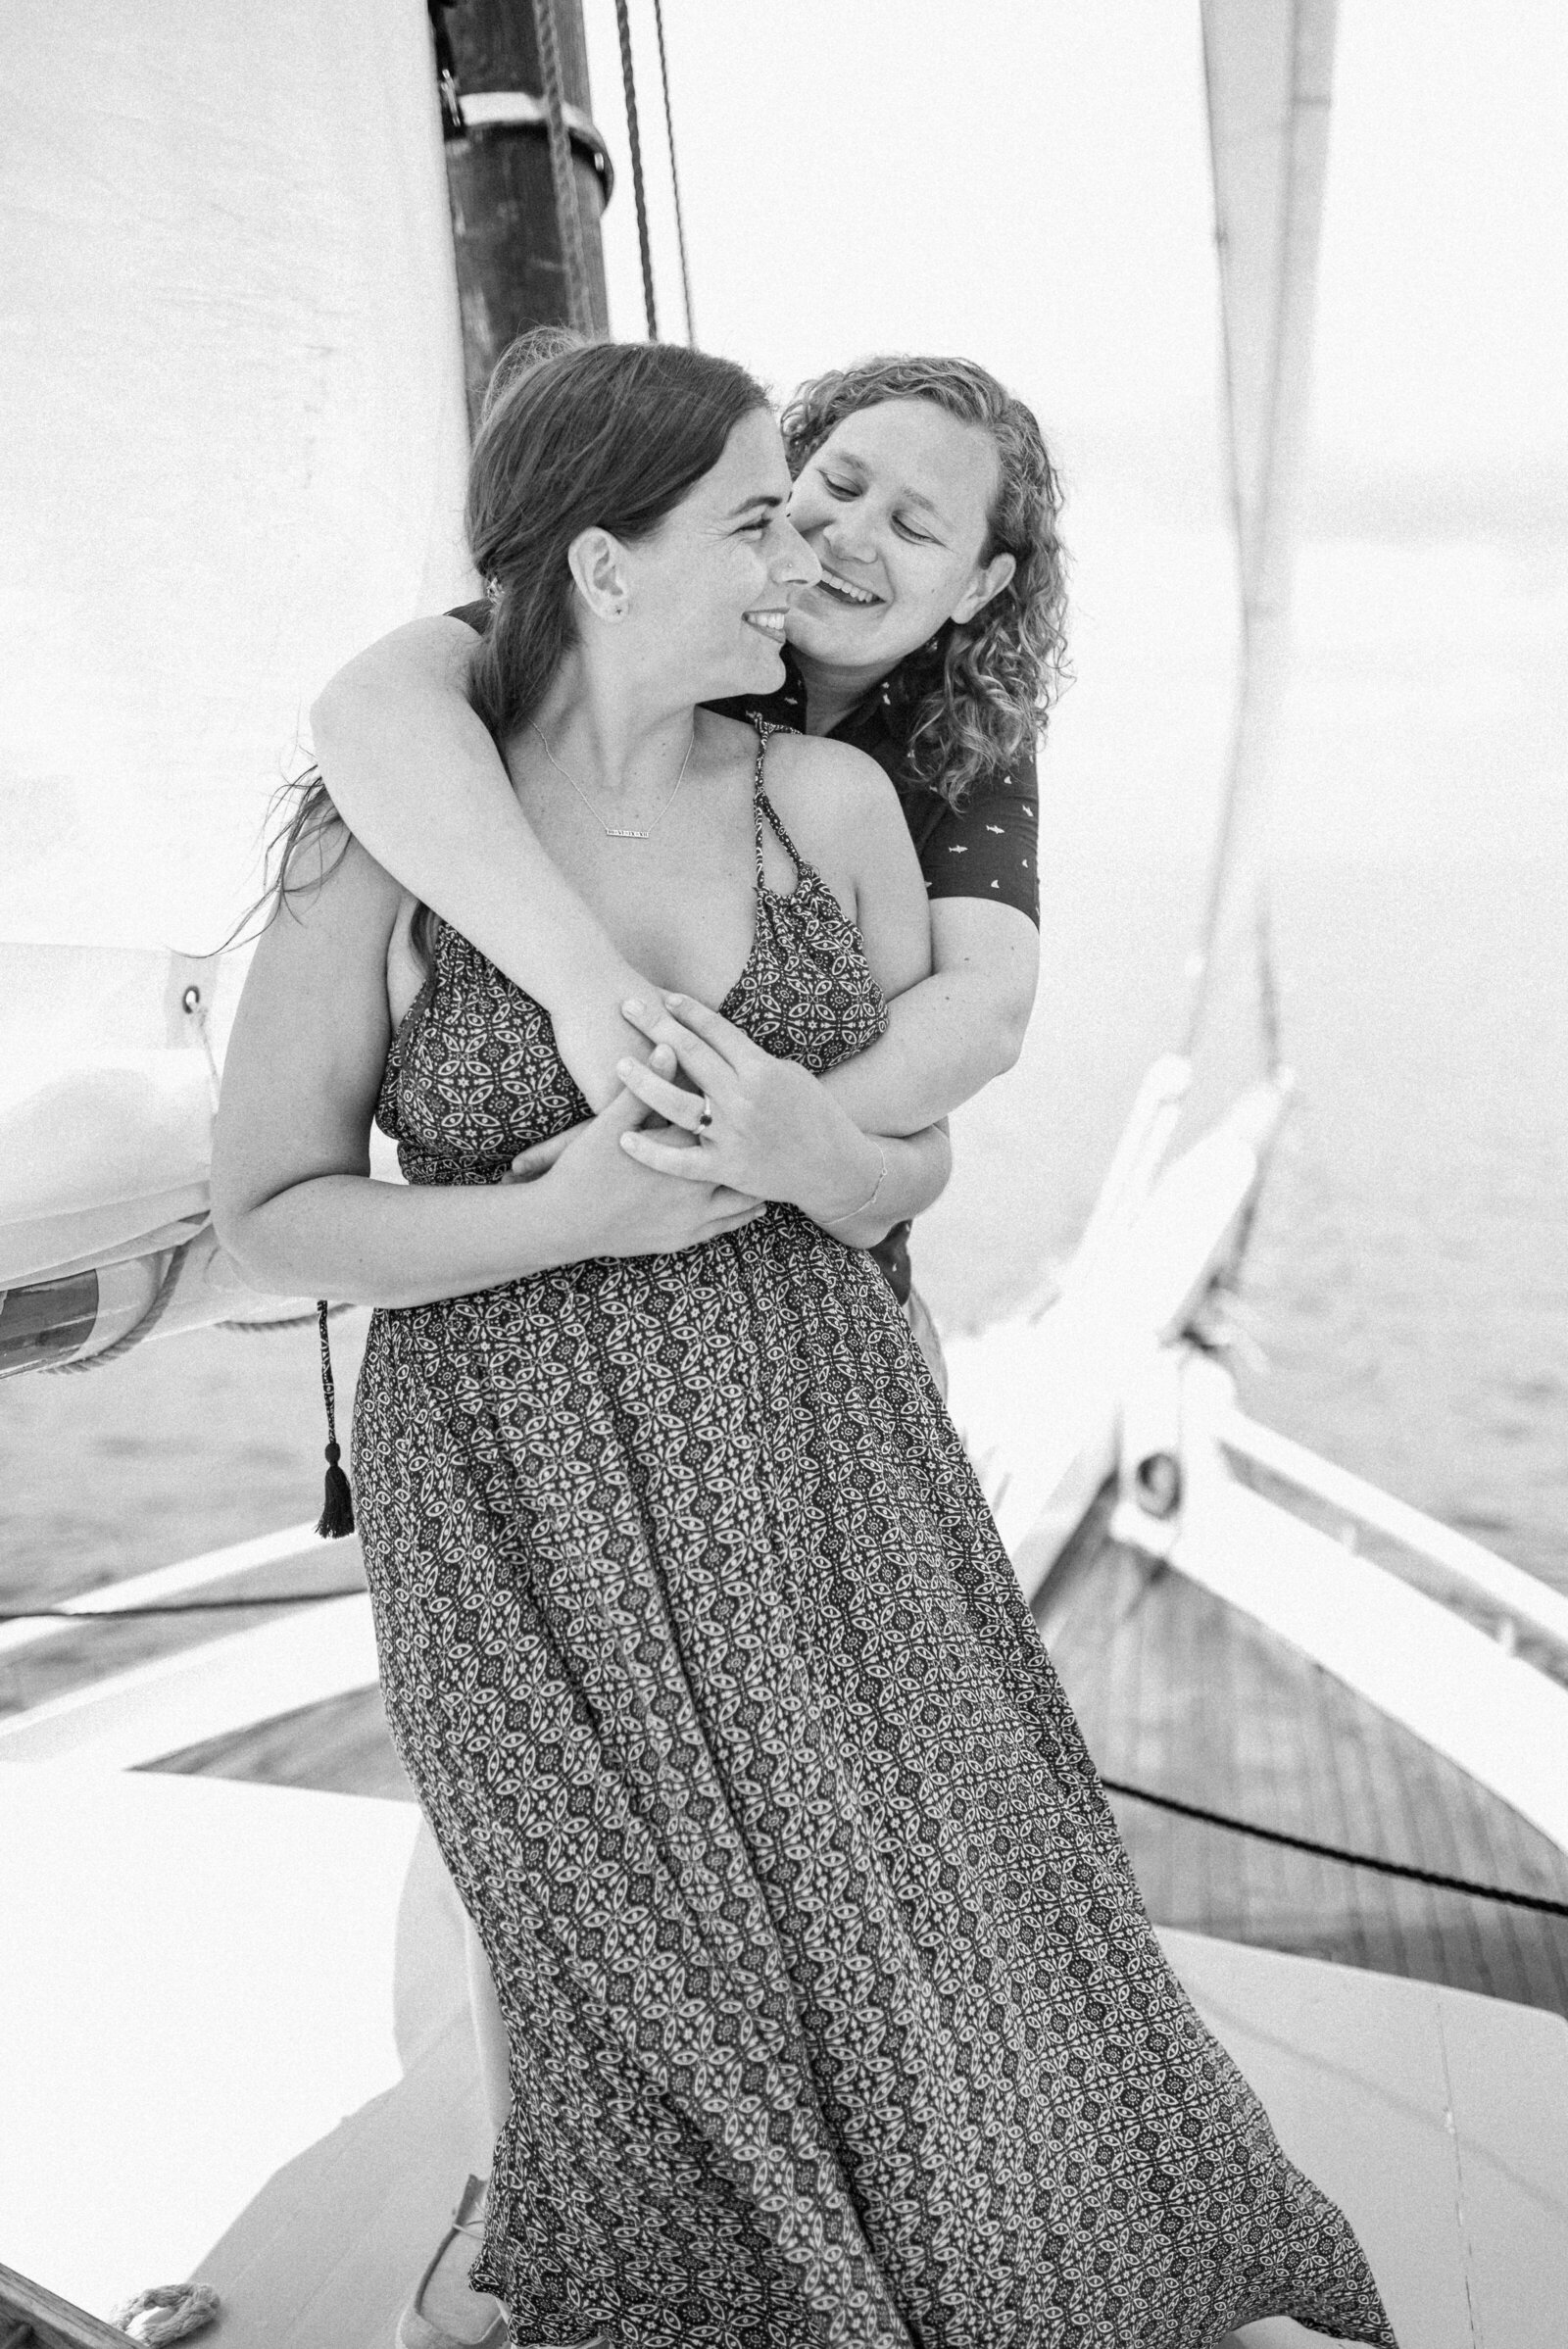 engaged couple wrapped in a from behind hug on a sailboat.